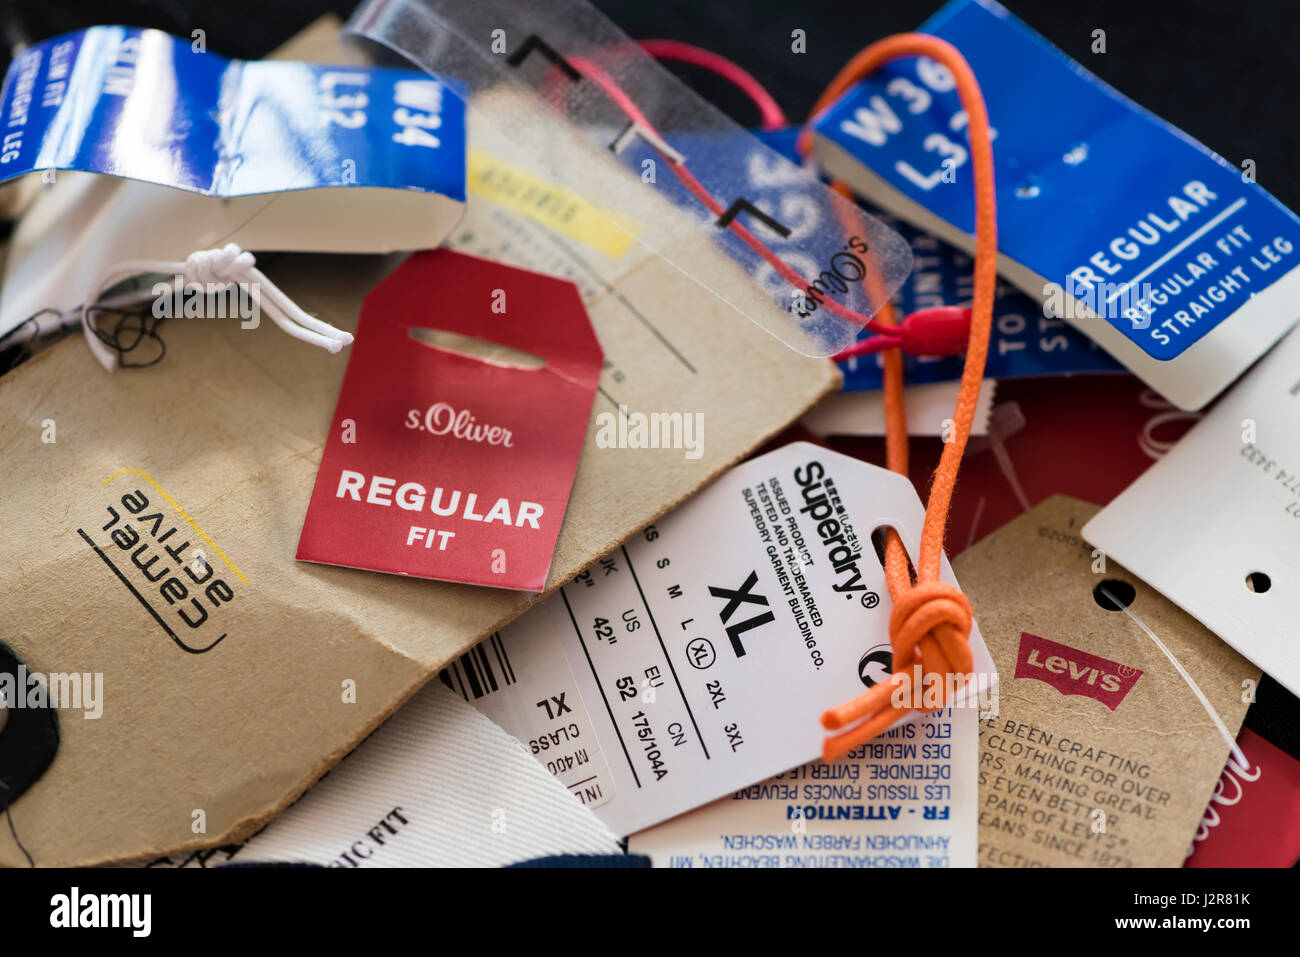 Large pile of various clothing brand label tags, removed from newly bought clothes after shopping. Labels show brand name, price, size etc. Stock Photo